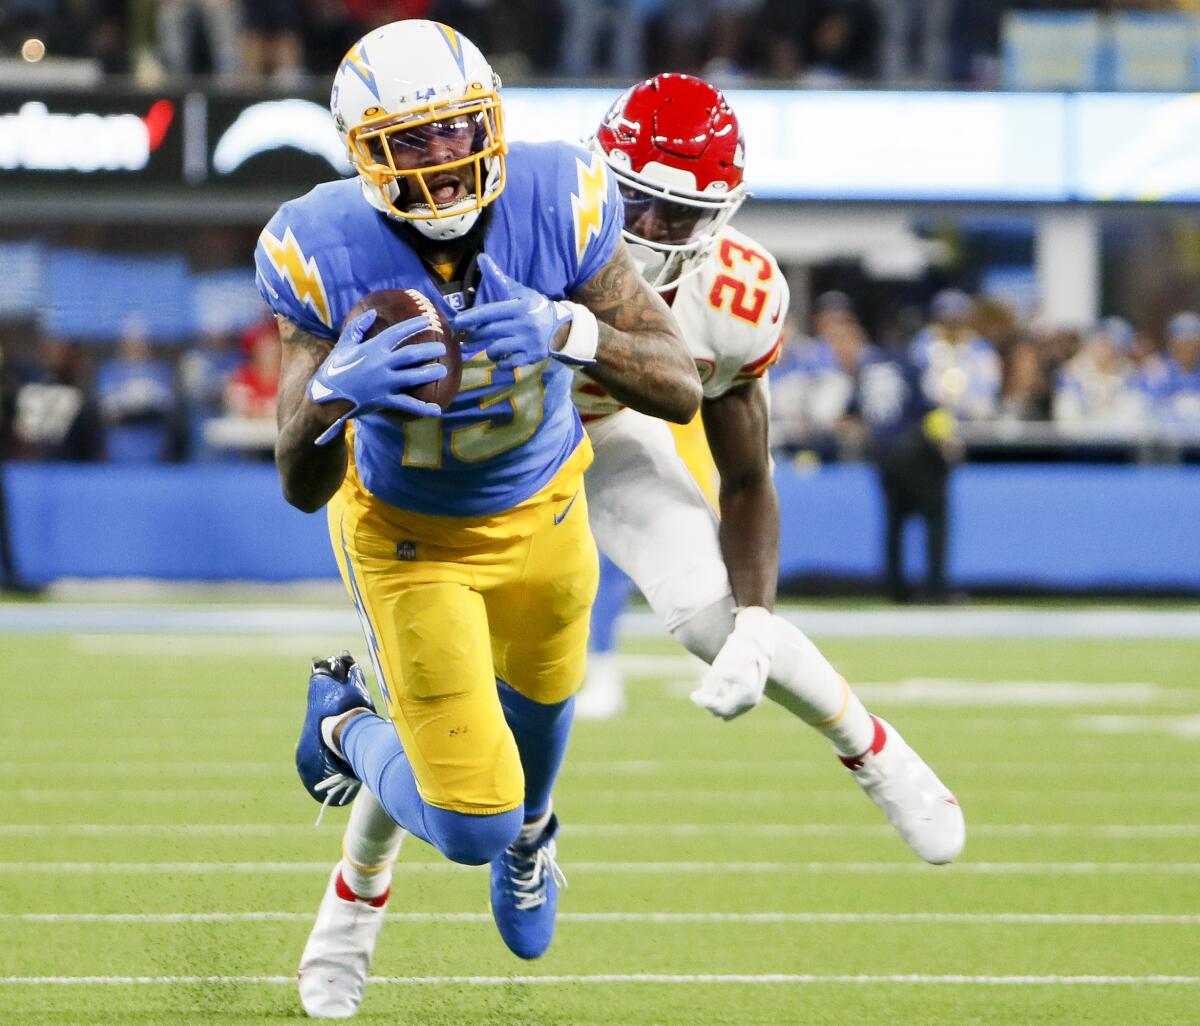 Chargers wide receiver Keenan Allen catches a pass in front of Kansas City Chiefs cornerback Joshua Williams.